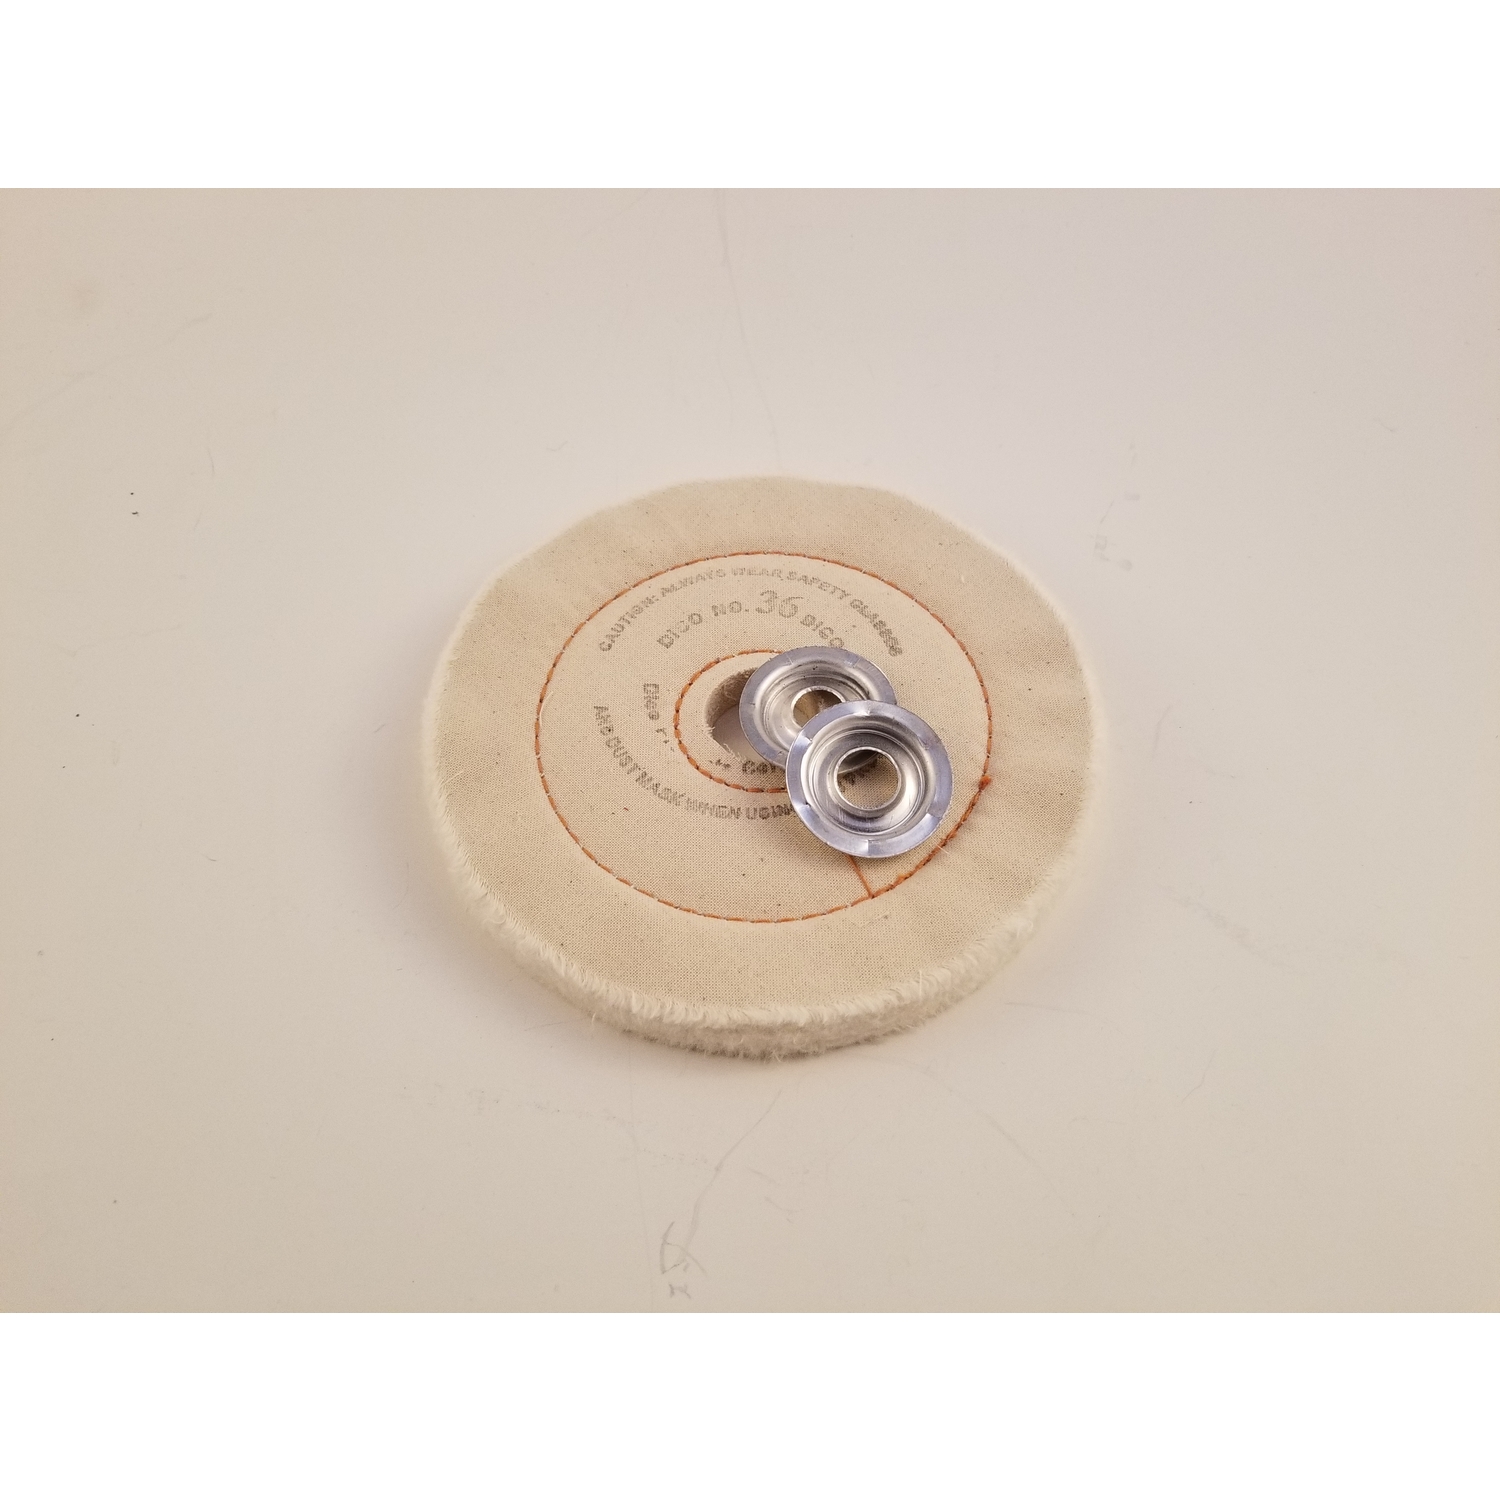 Dico Products Dico 6 in. Buffing Wheel